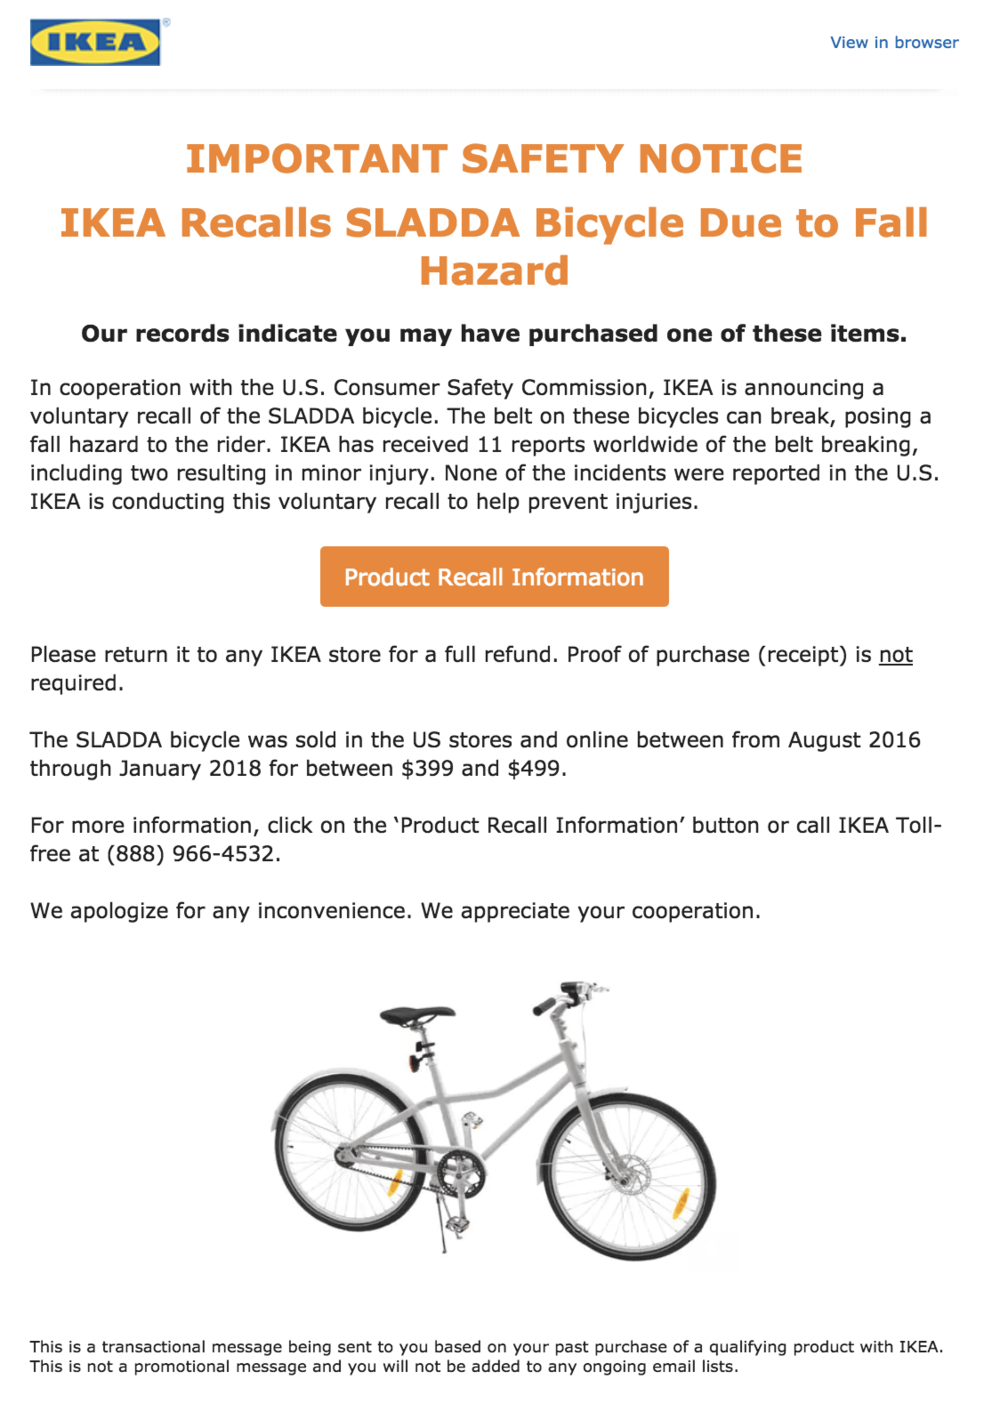 UPDATED: Bike Review: IKEA SLADDA vs. Priority Classic 2.0 | by Mikey T.  Krieger | Medium